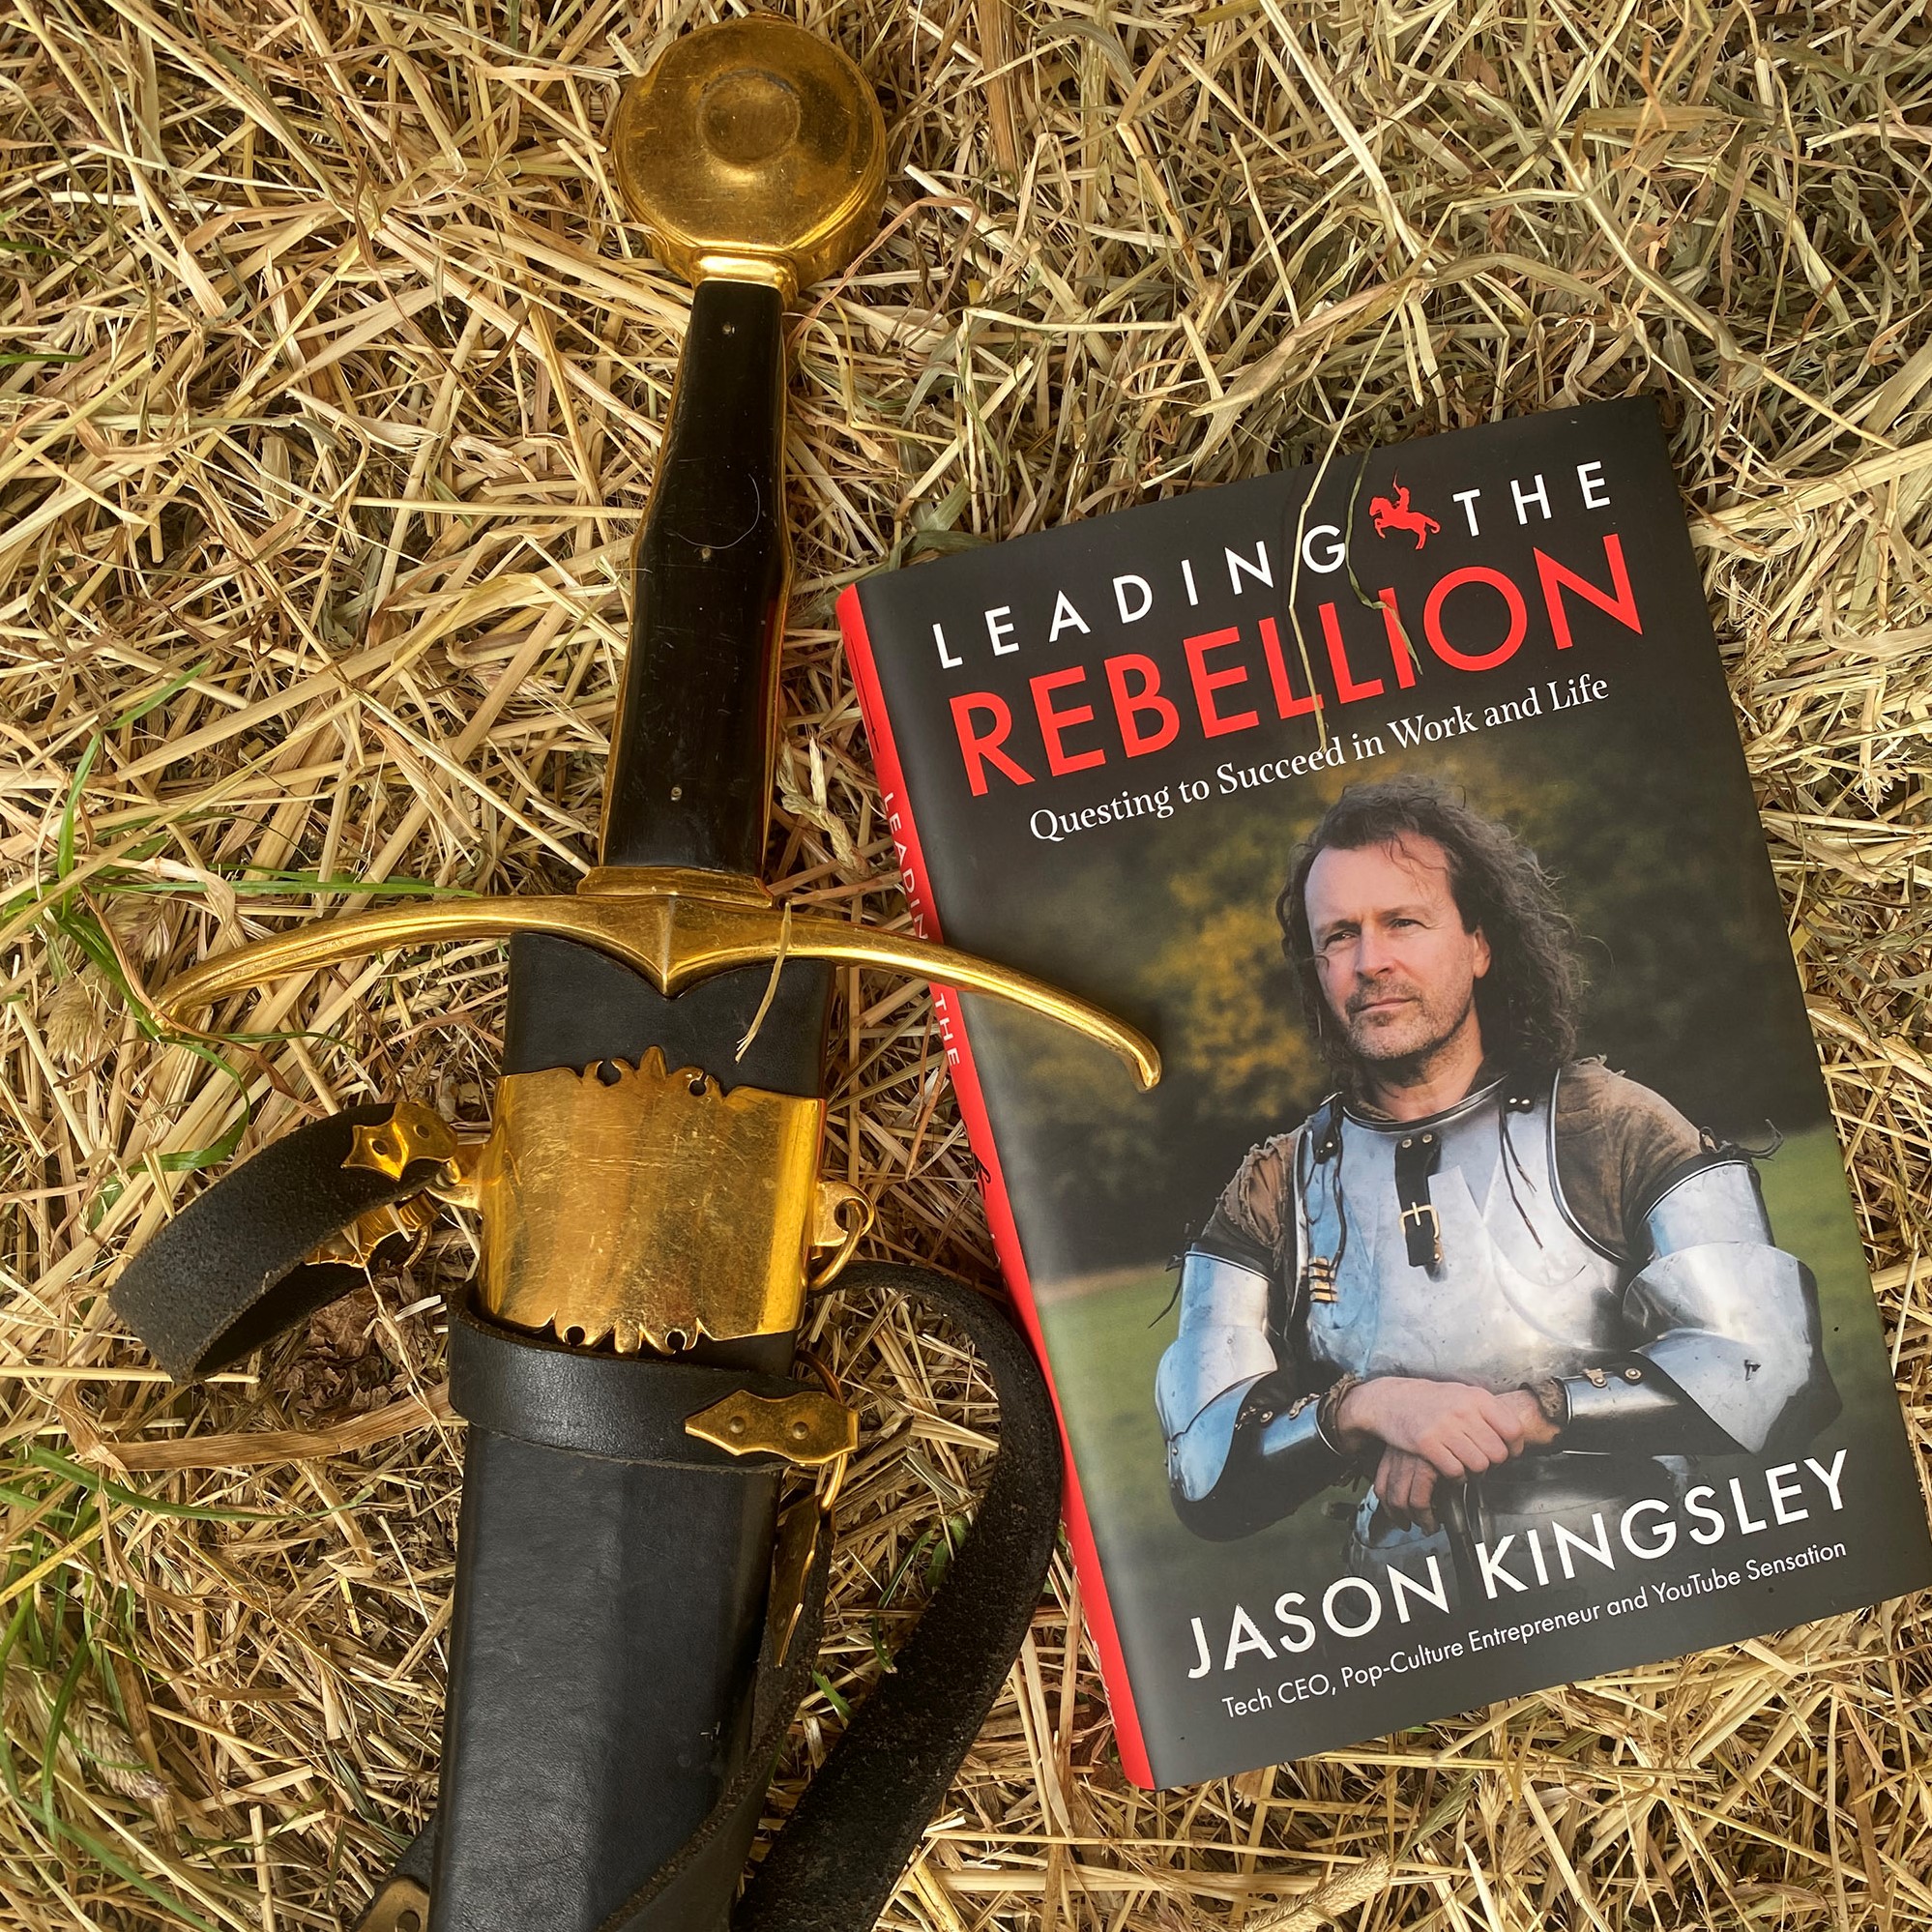 Jason's book Leading the Rebellion sits on some hay next to an authentic sword with gold detailing. Jason's upper body adorns the cover of his book, he's wearing Medieval armour.